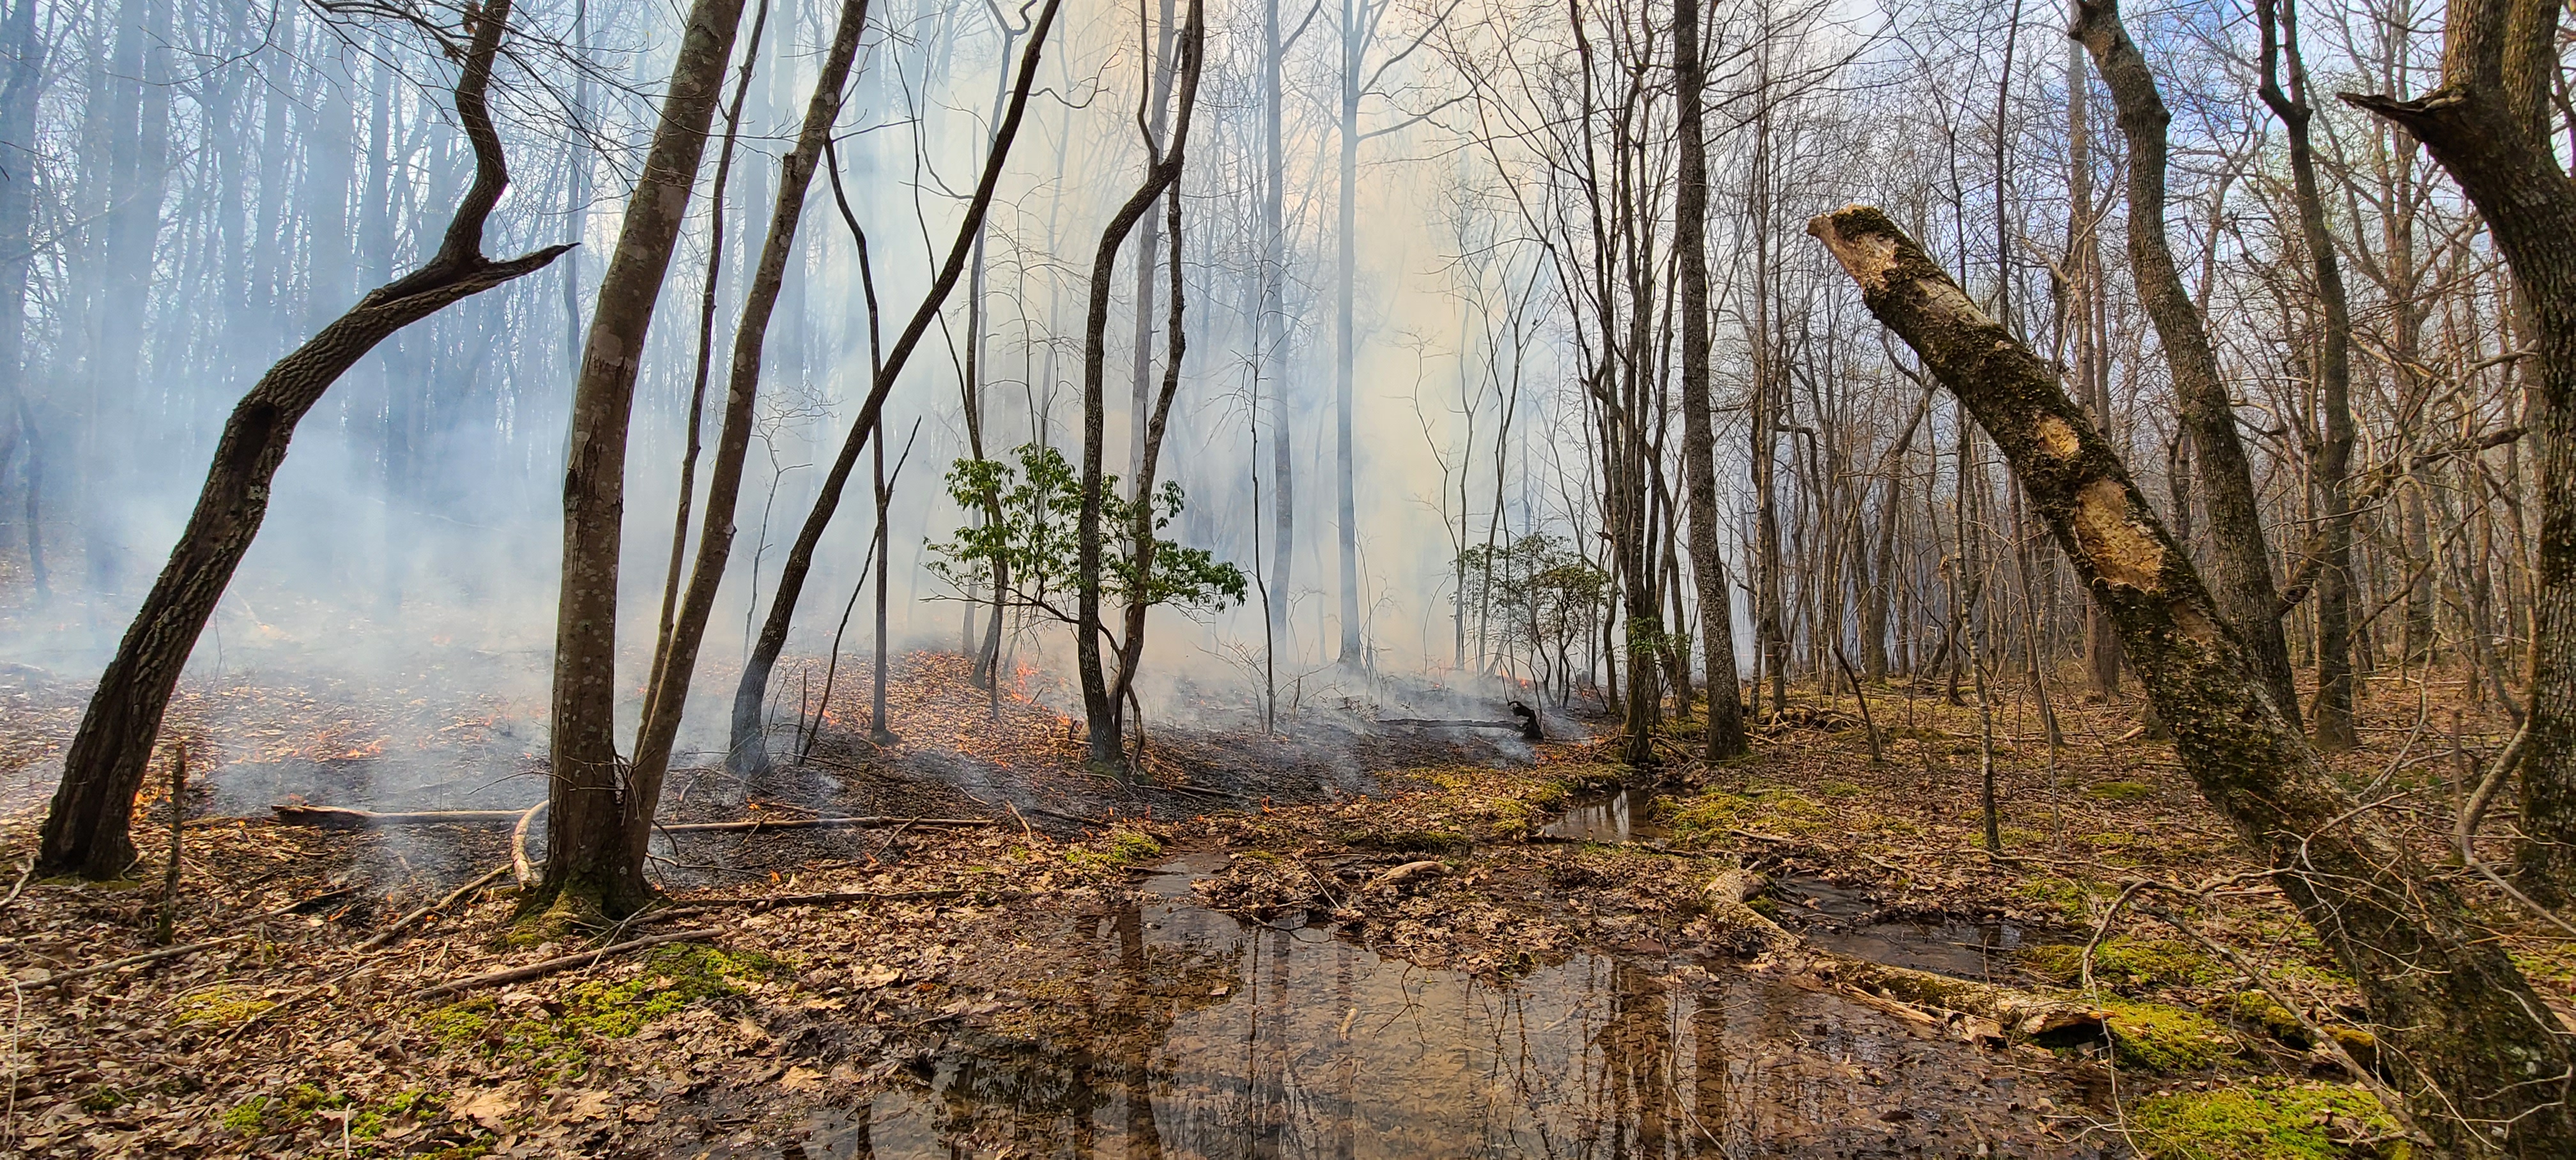 Showcase Image for Effects of Prescribed Fire on Stream Water Quality in a Forested Watershed